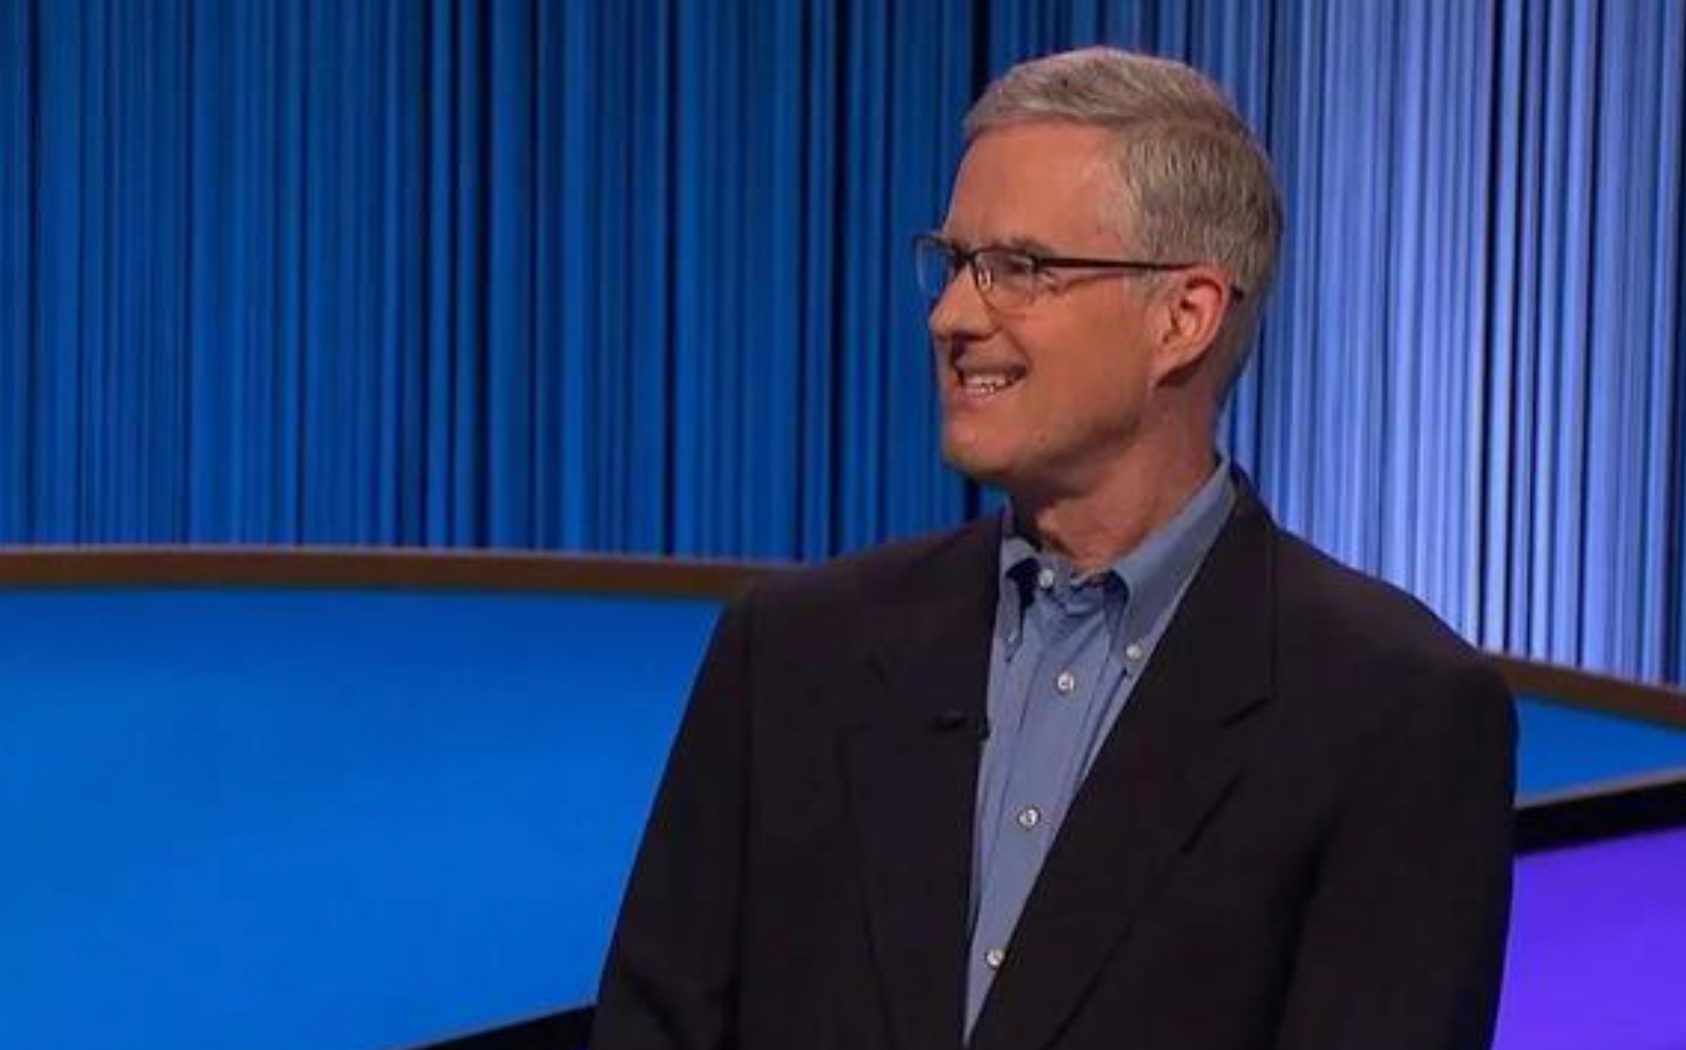 Jay Fisher revealed on the show that he was a senator for 22 hours, which Ken Jennings made a controversial joke about